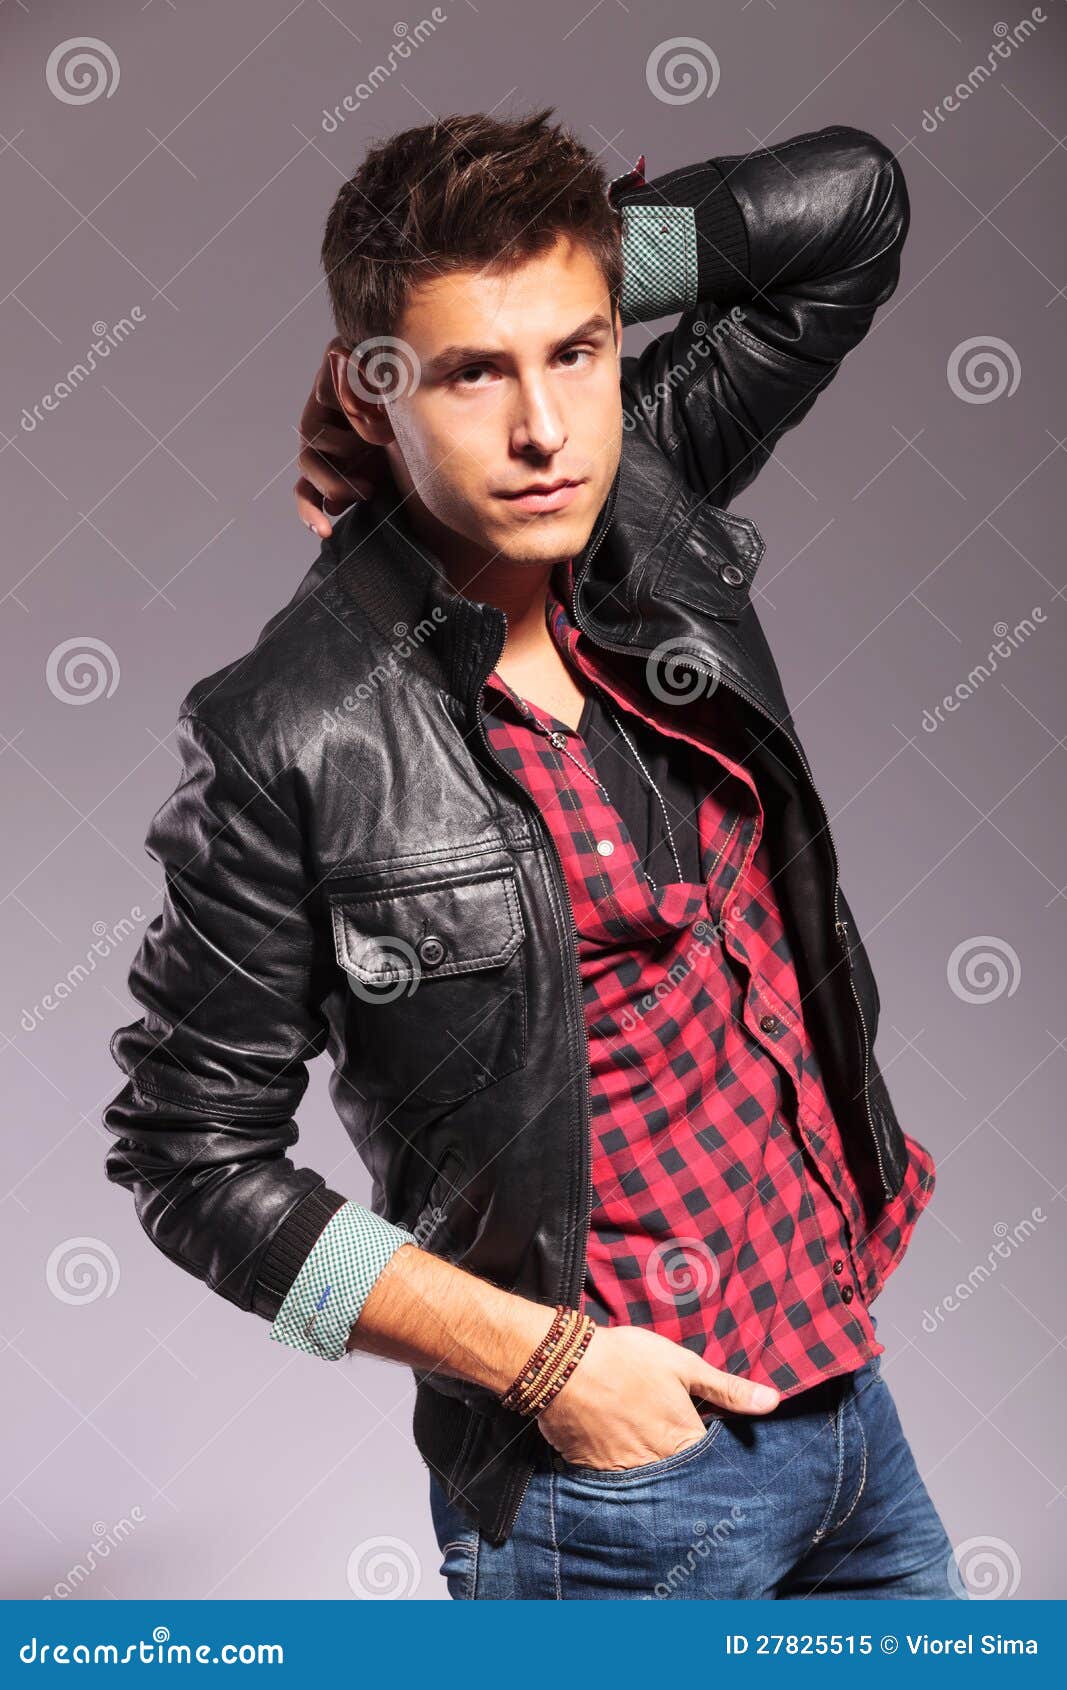 Leather jackets for young guys – Modern fashion jacket photo blog